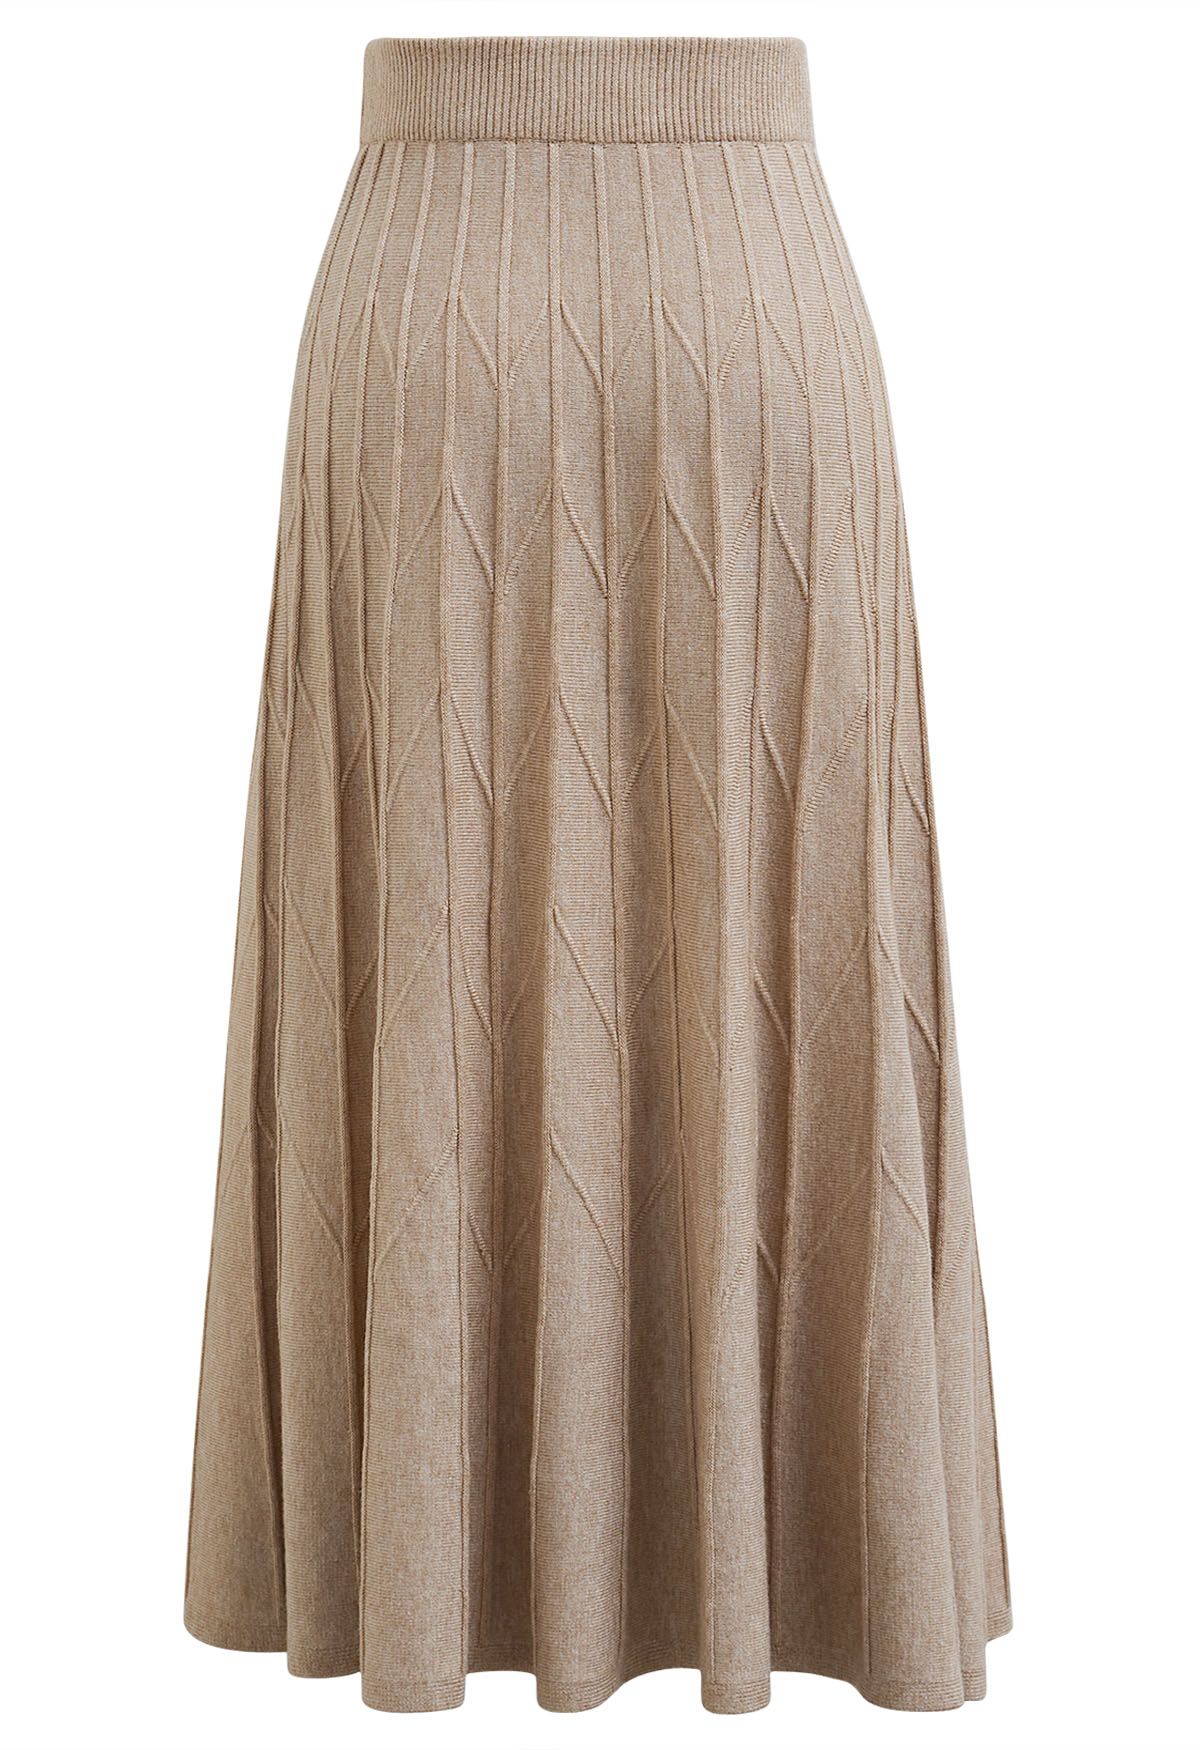 Zigzag Pleated Knit Skirt in Sand